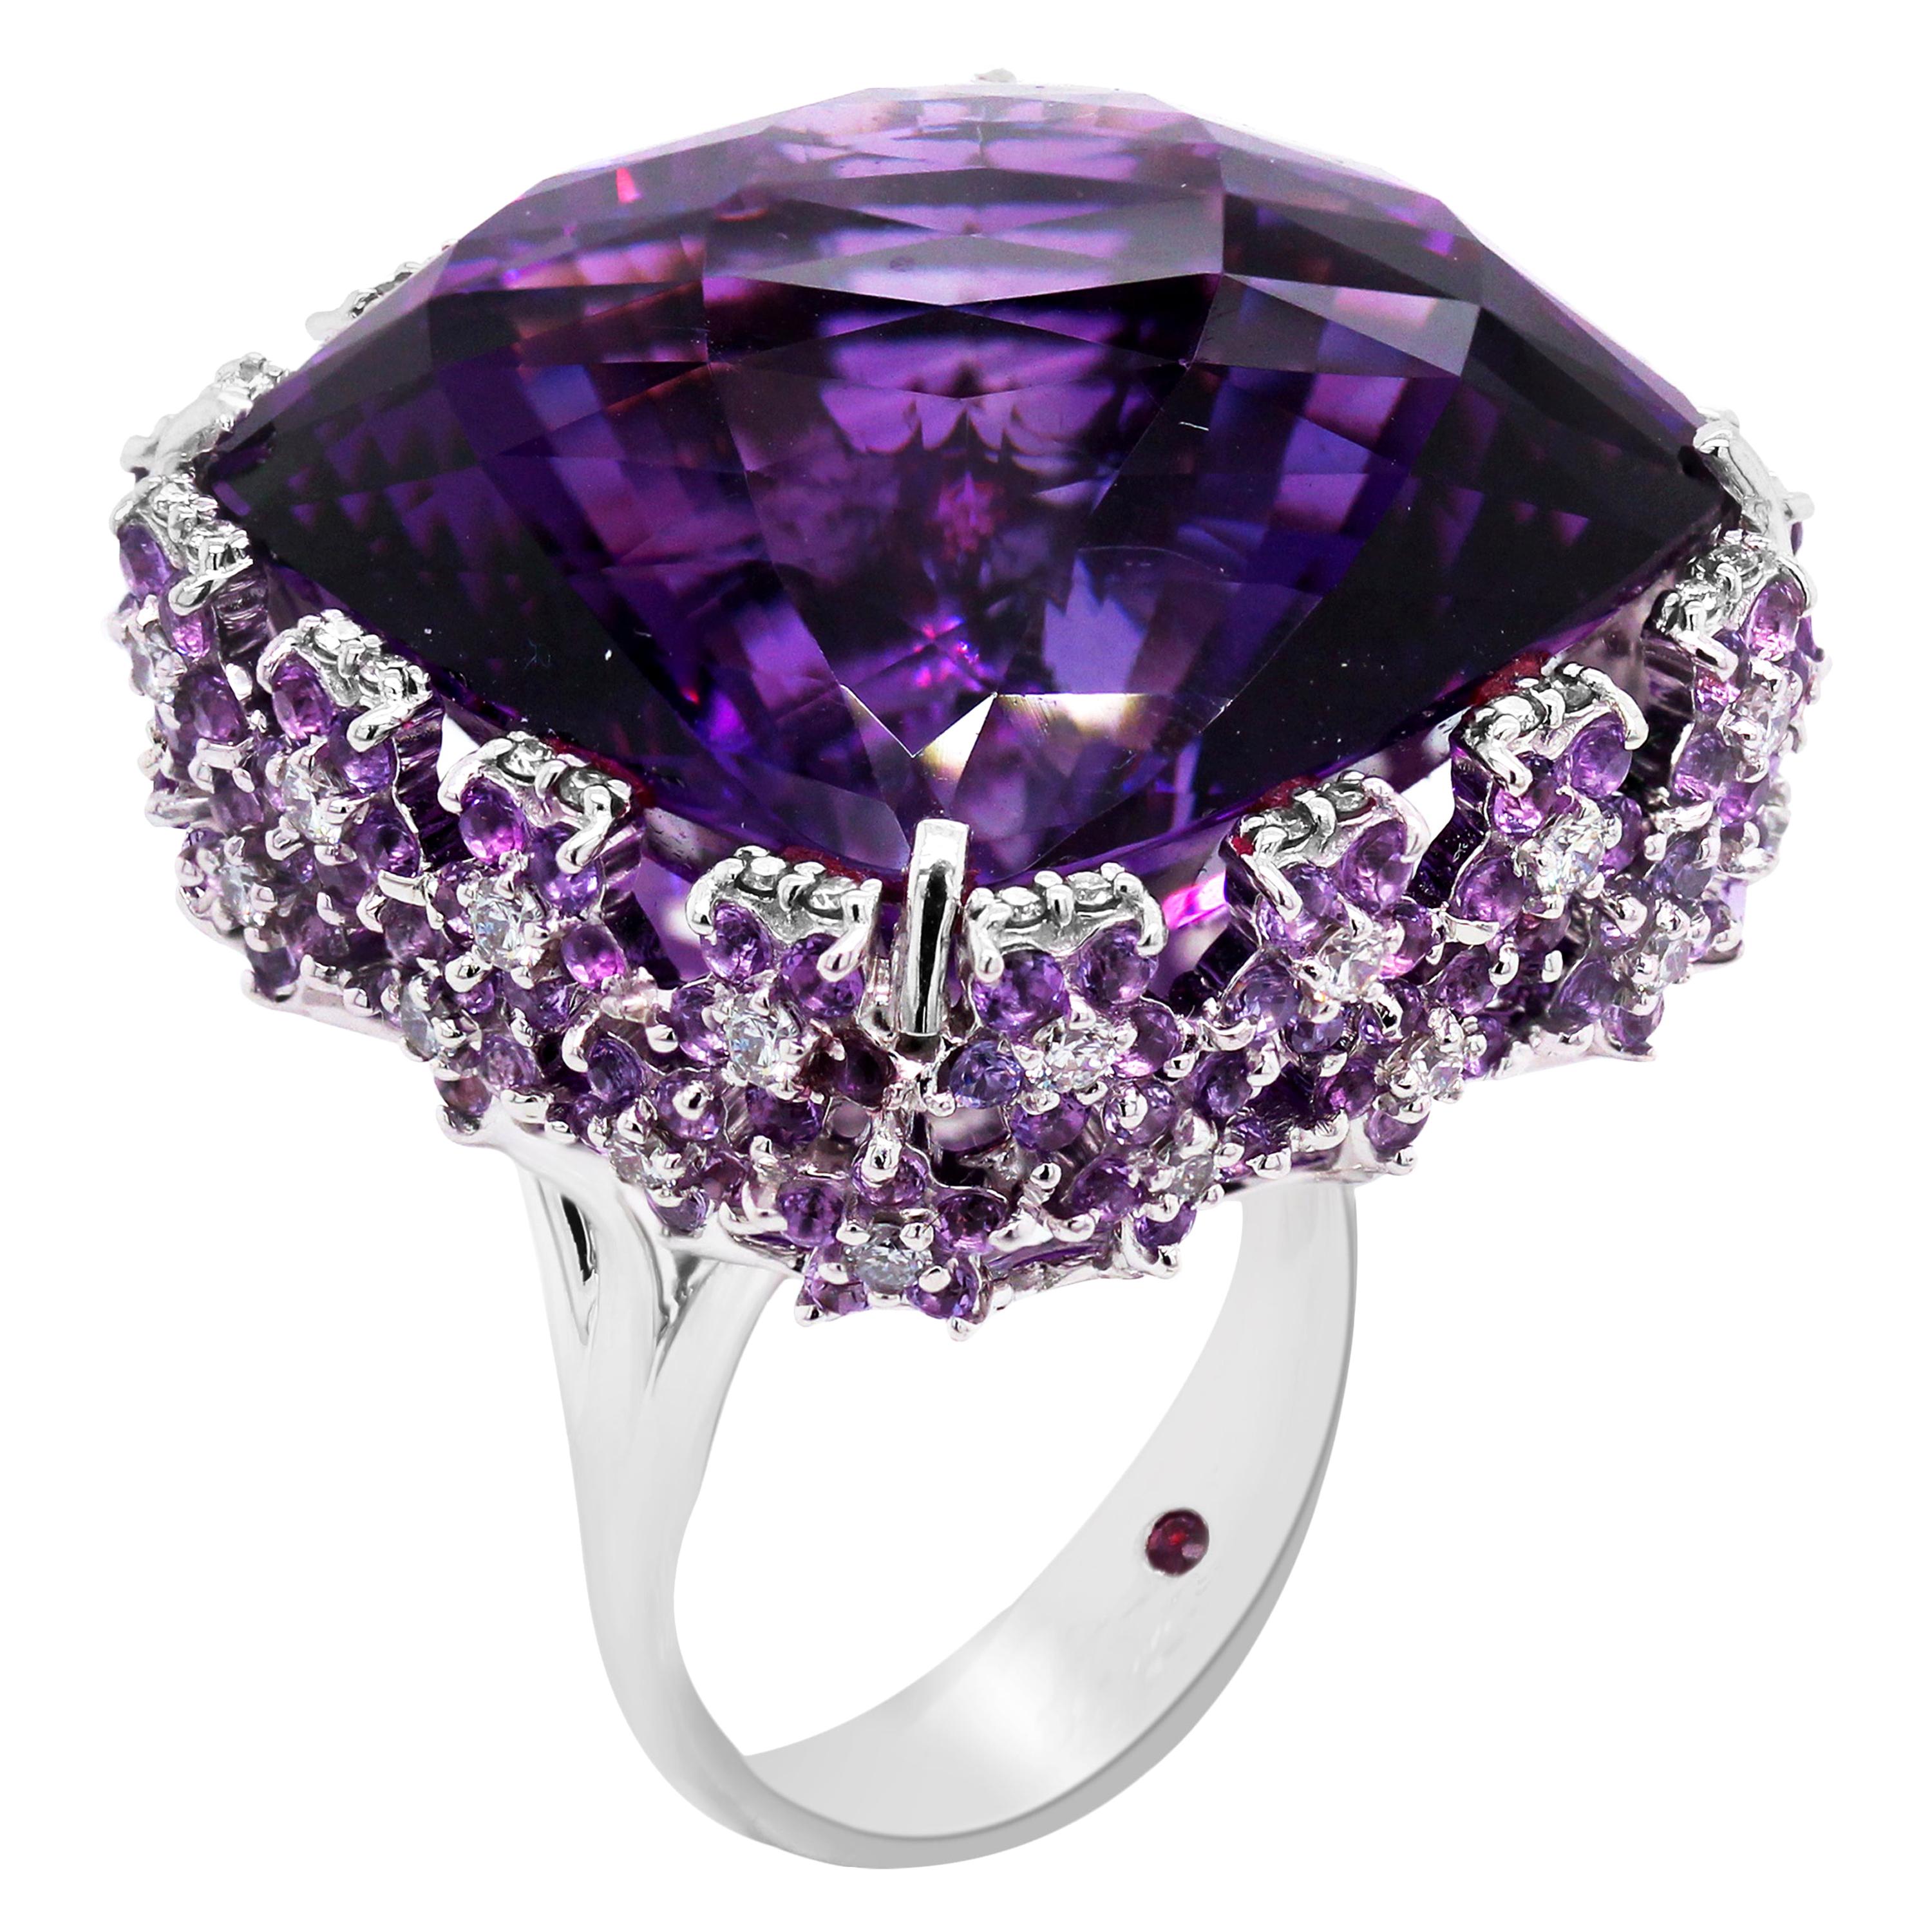 Roberto Coin 73.44 Carat Amethyst White Gold Diamond Large Cocktail Ring For Sale